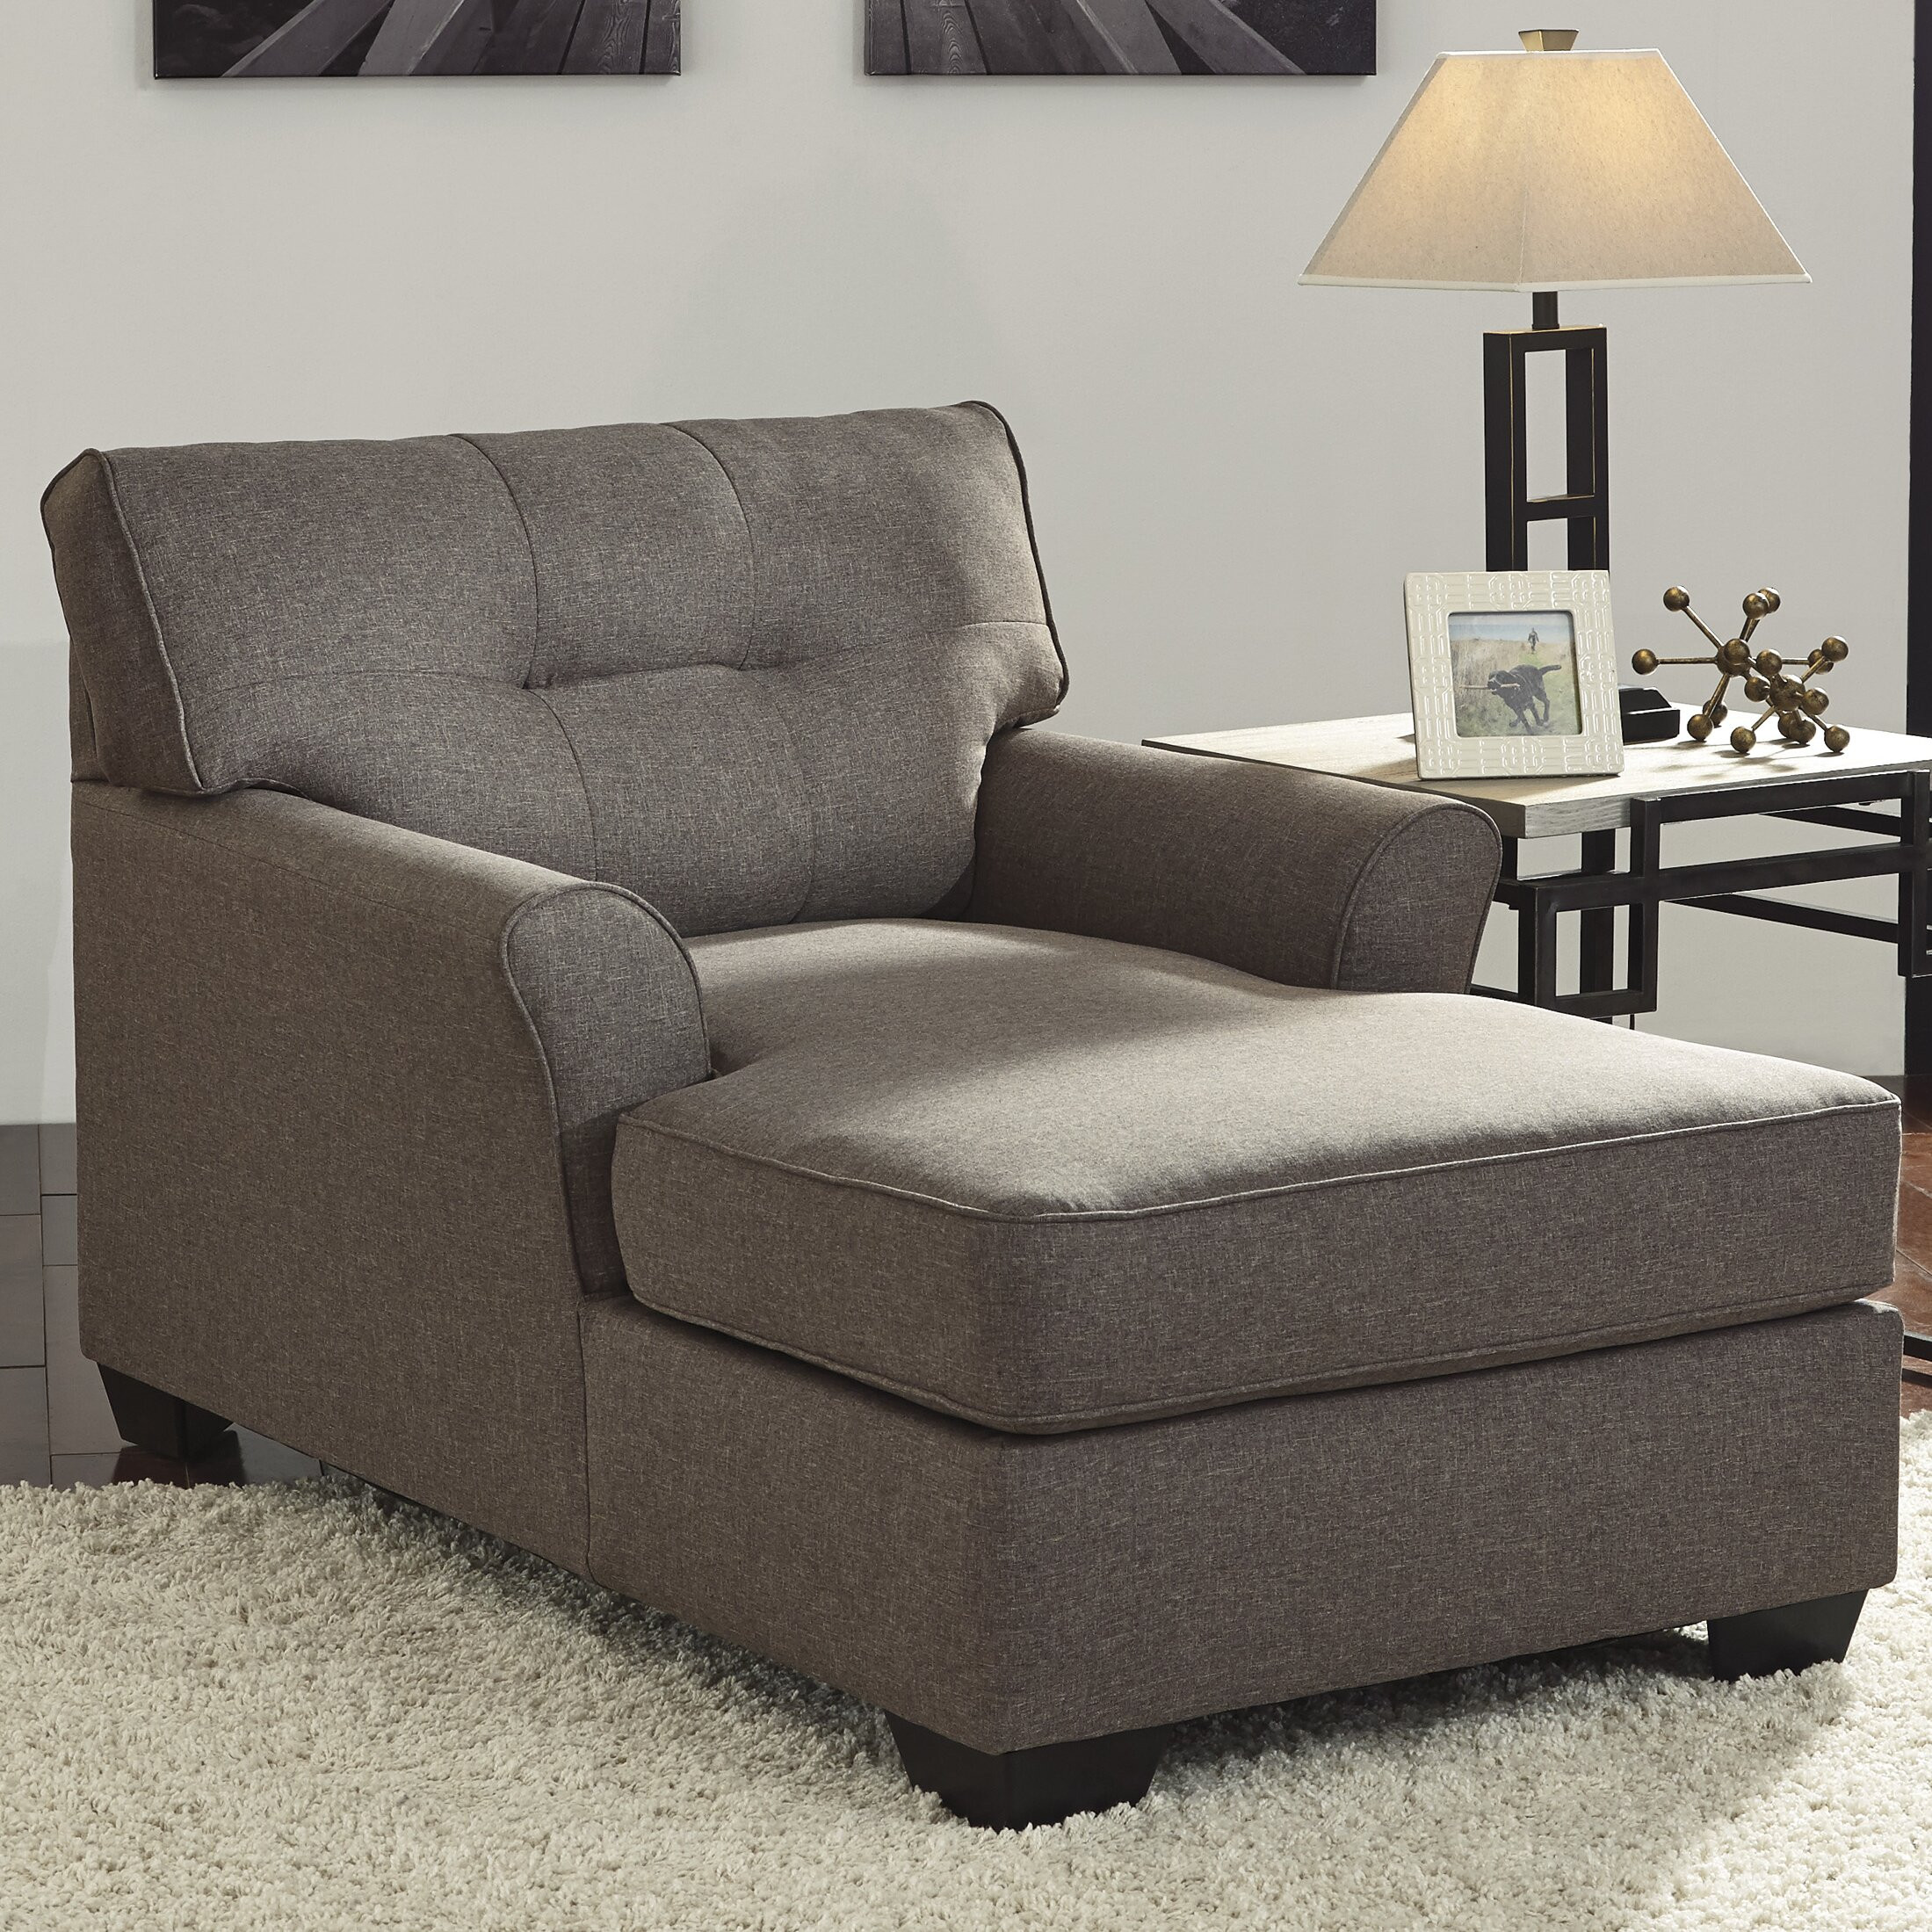 Living Room Chaise Lounge Chairs
 Signature Design by Ashley Tibbee Chaise Lounge & Reviews